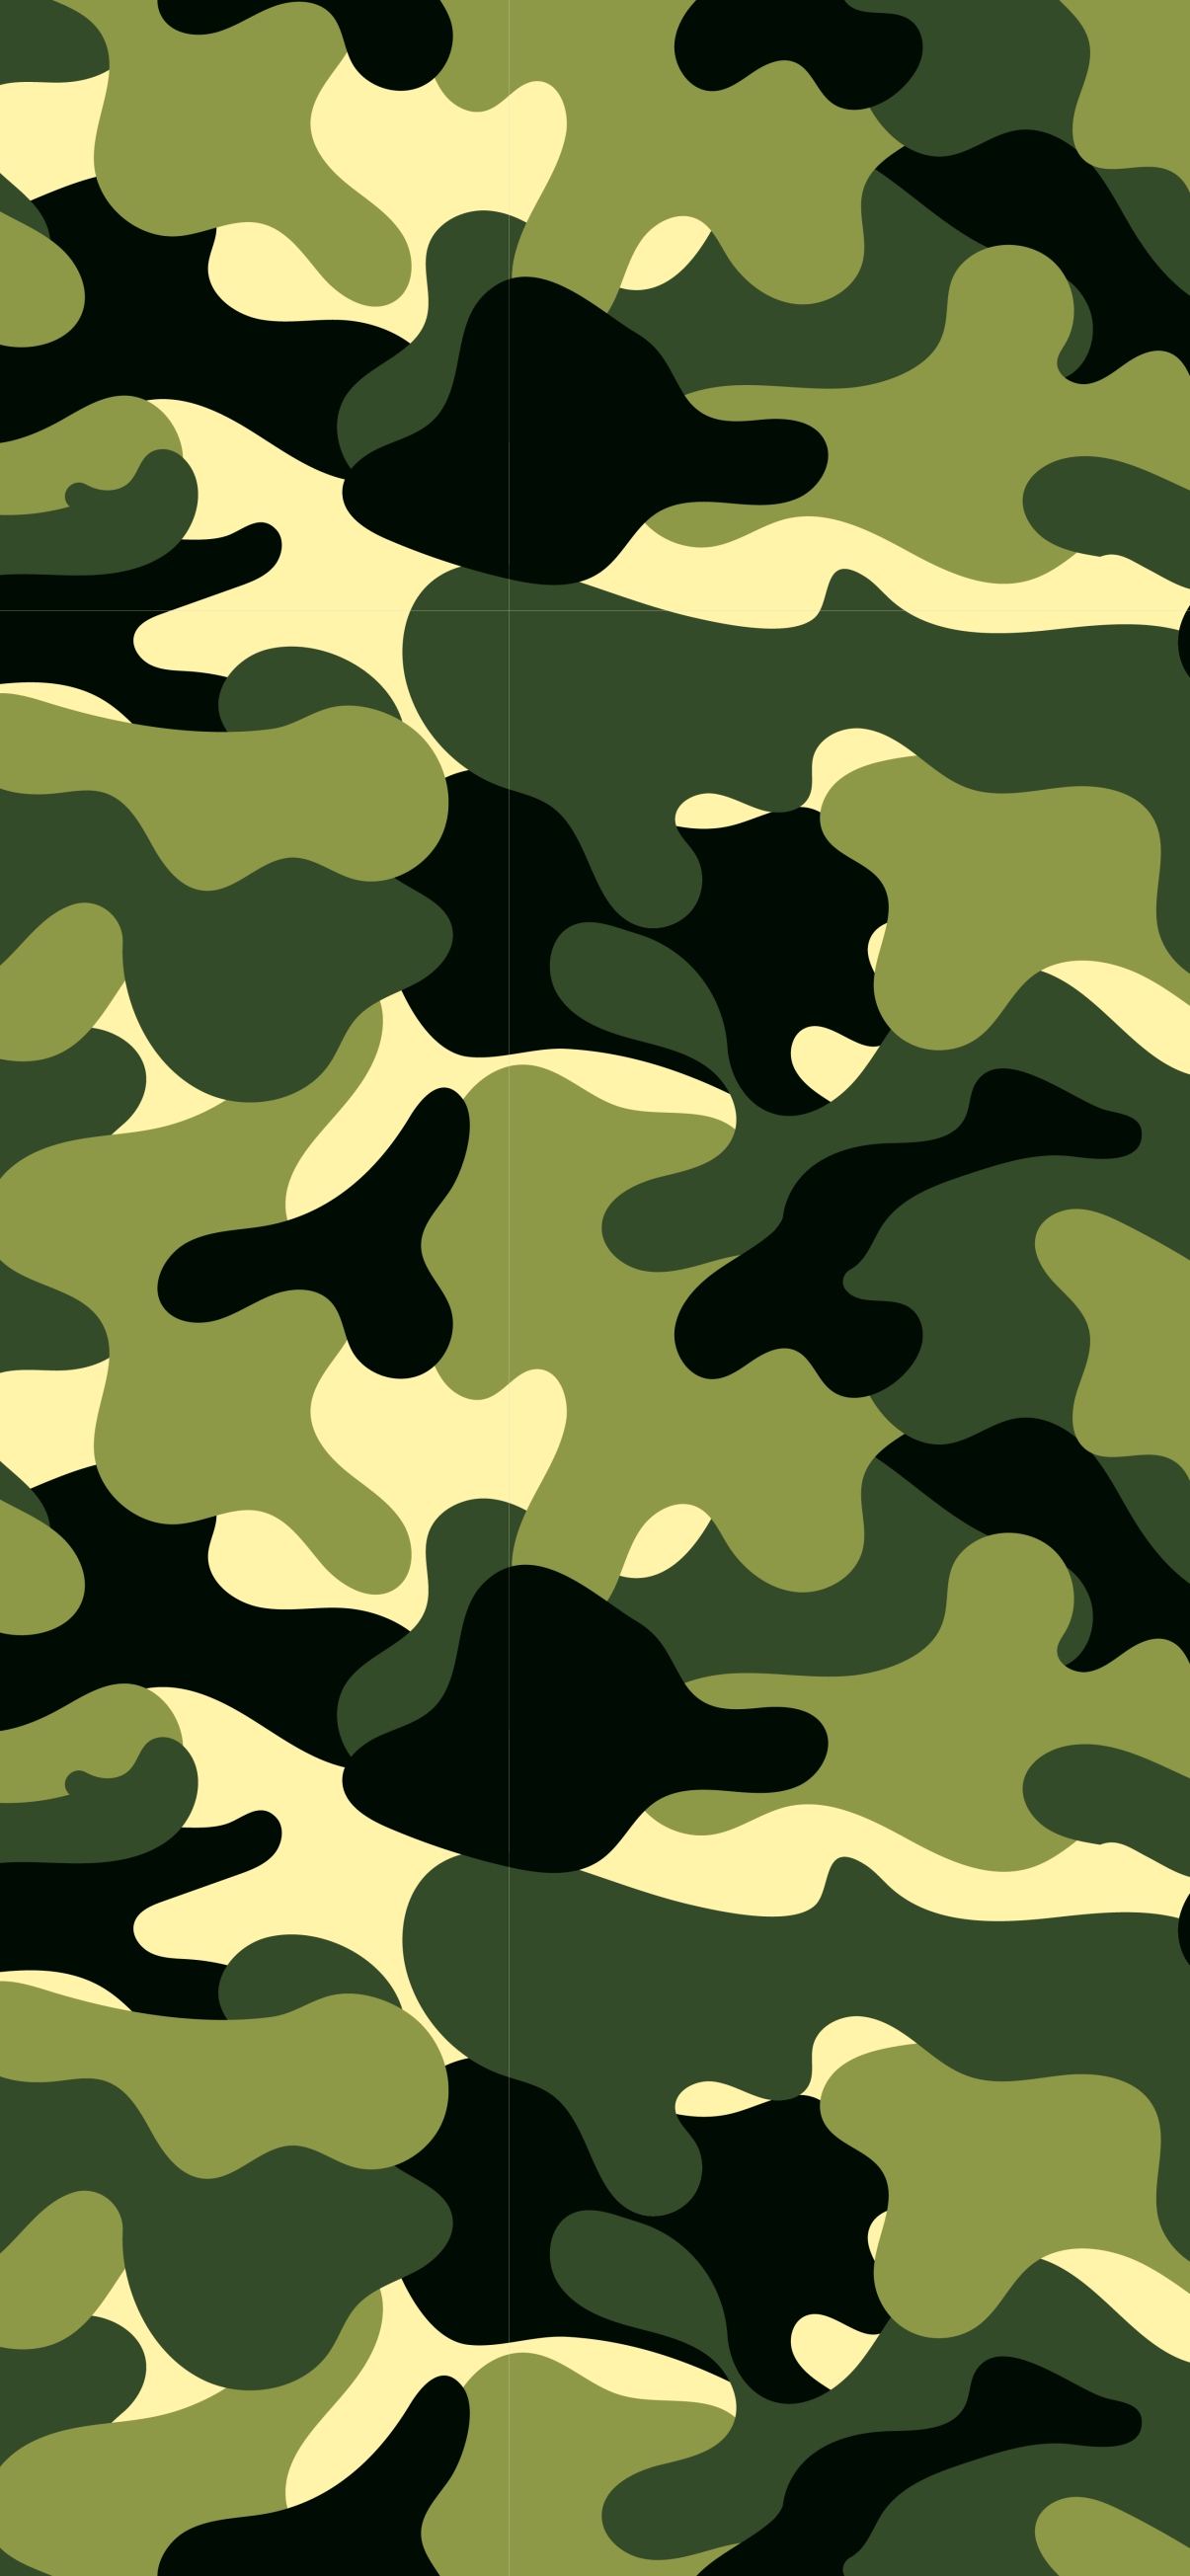 camouflage wallpapers hd on camouflage wallpaper hd